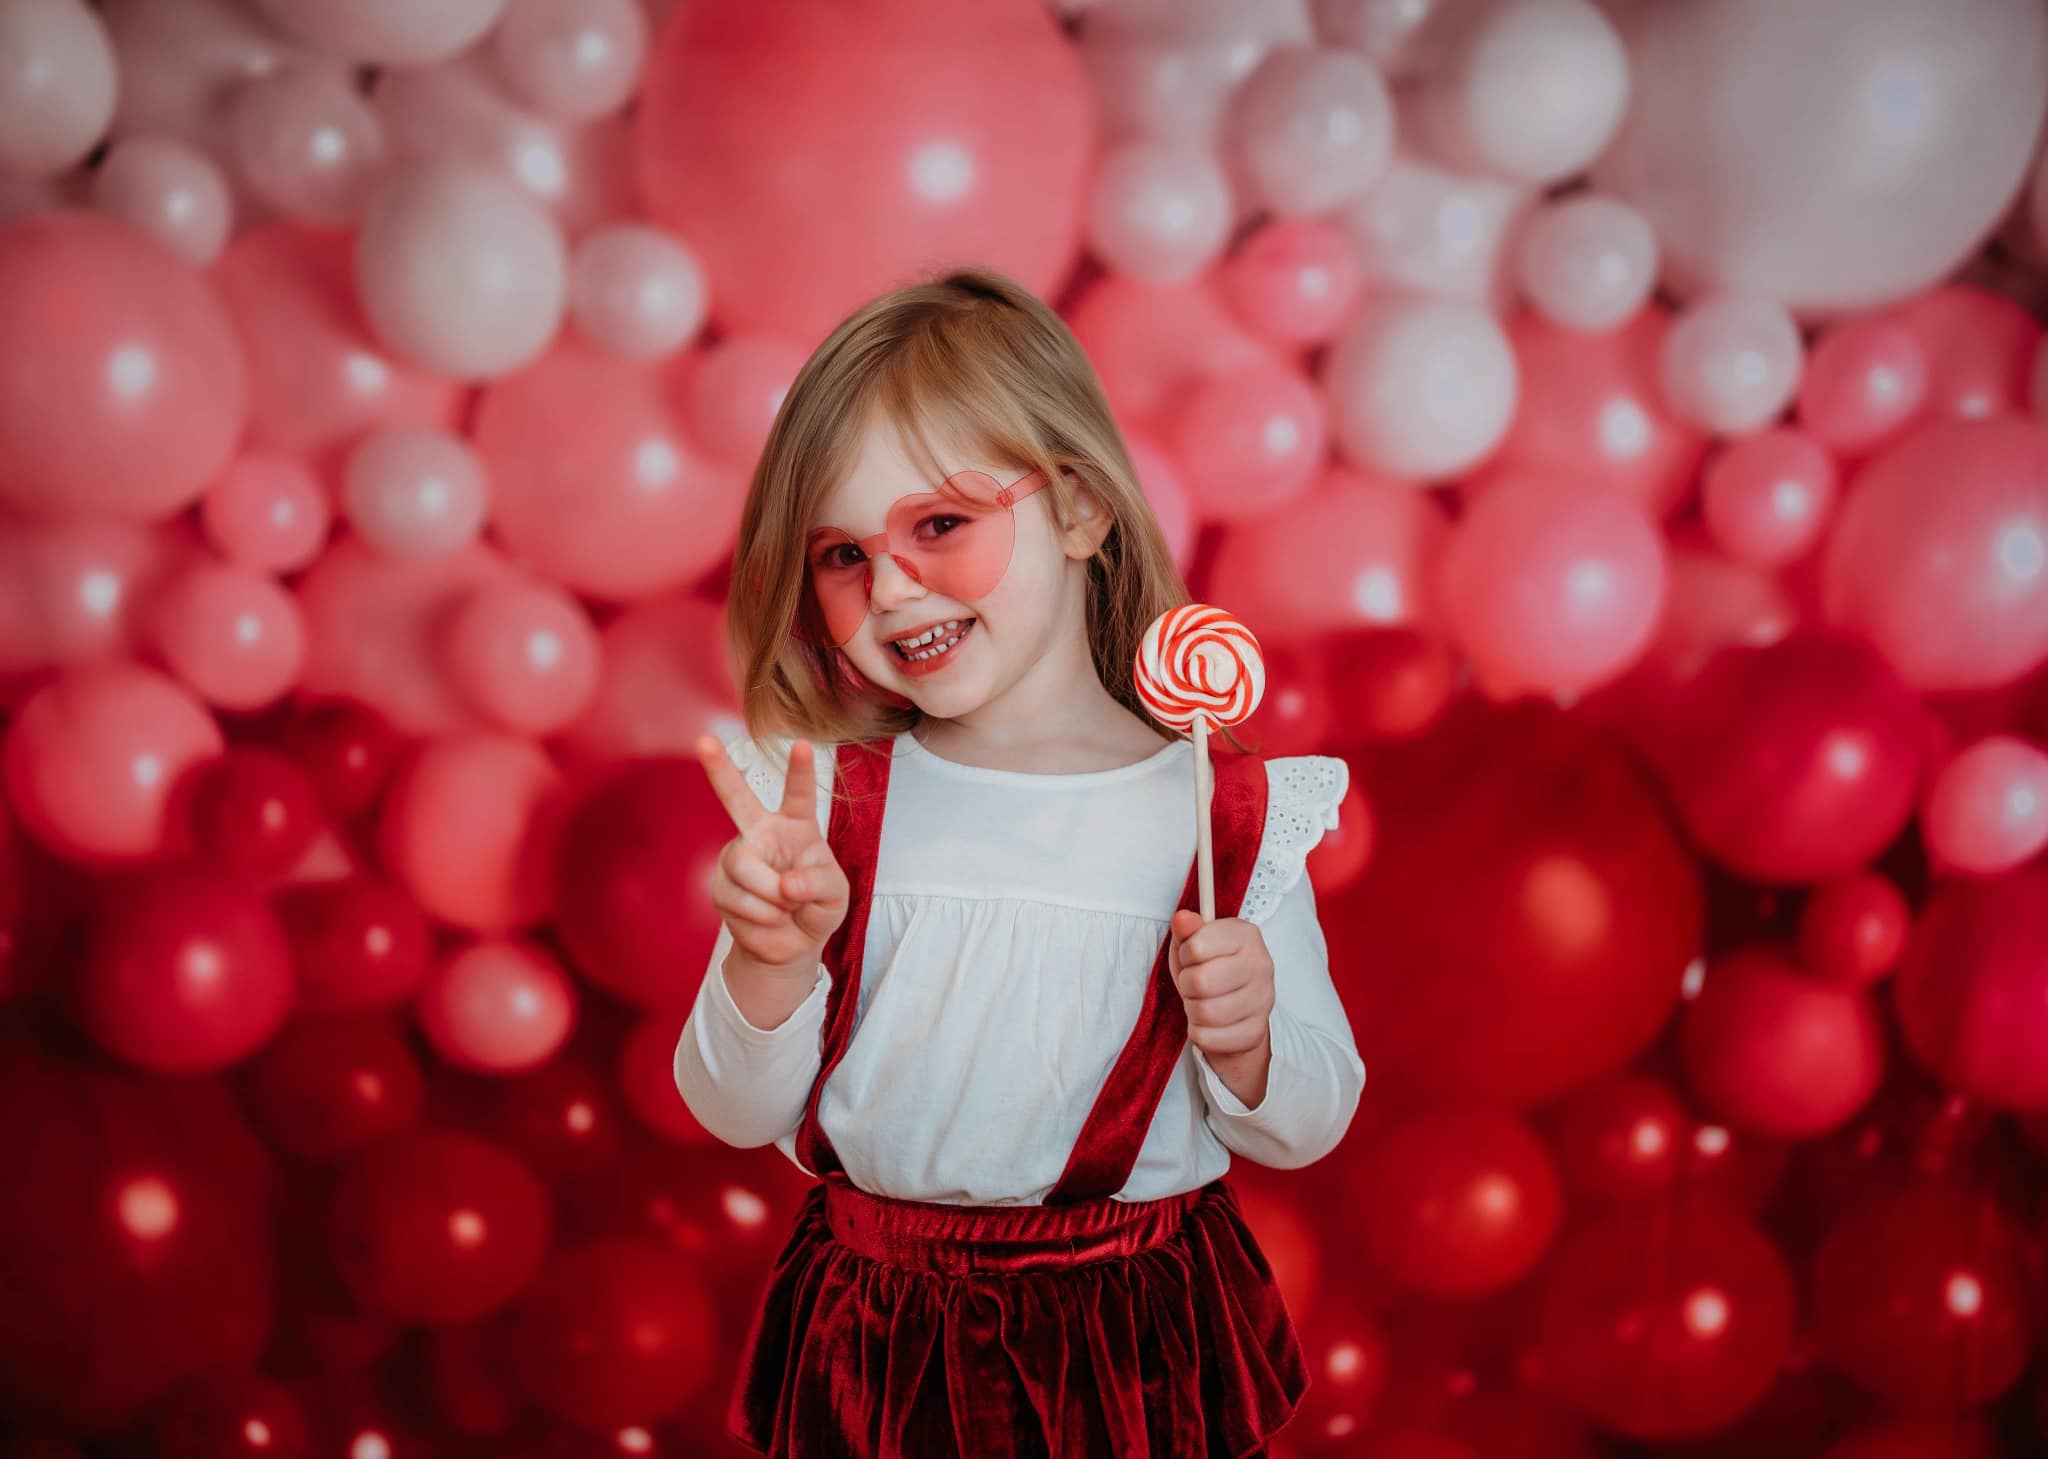 Kate Red Balloon Wall Birthday Cake Smash Party Backdrop for Photography Designed by Mandy Ringe Photography